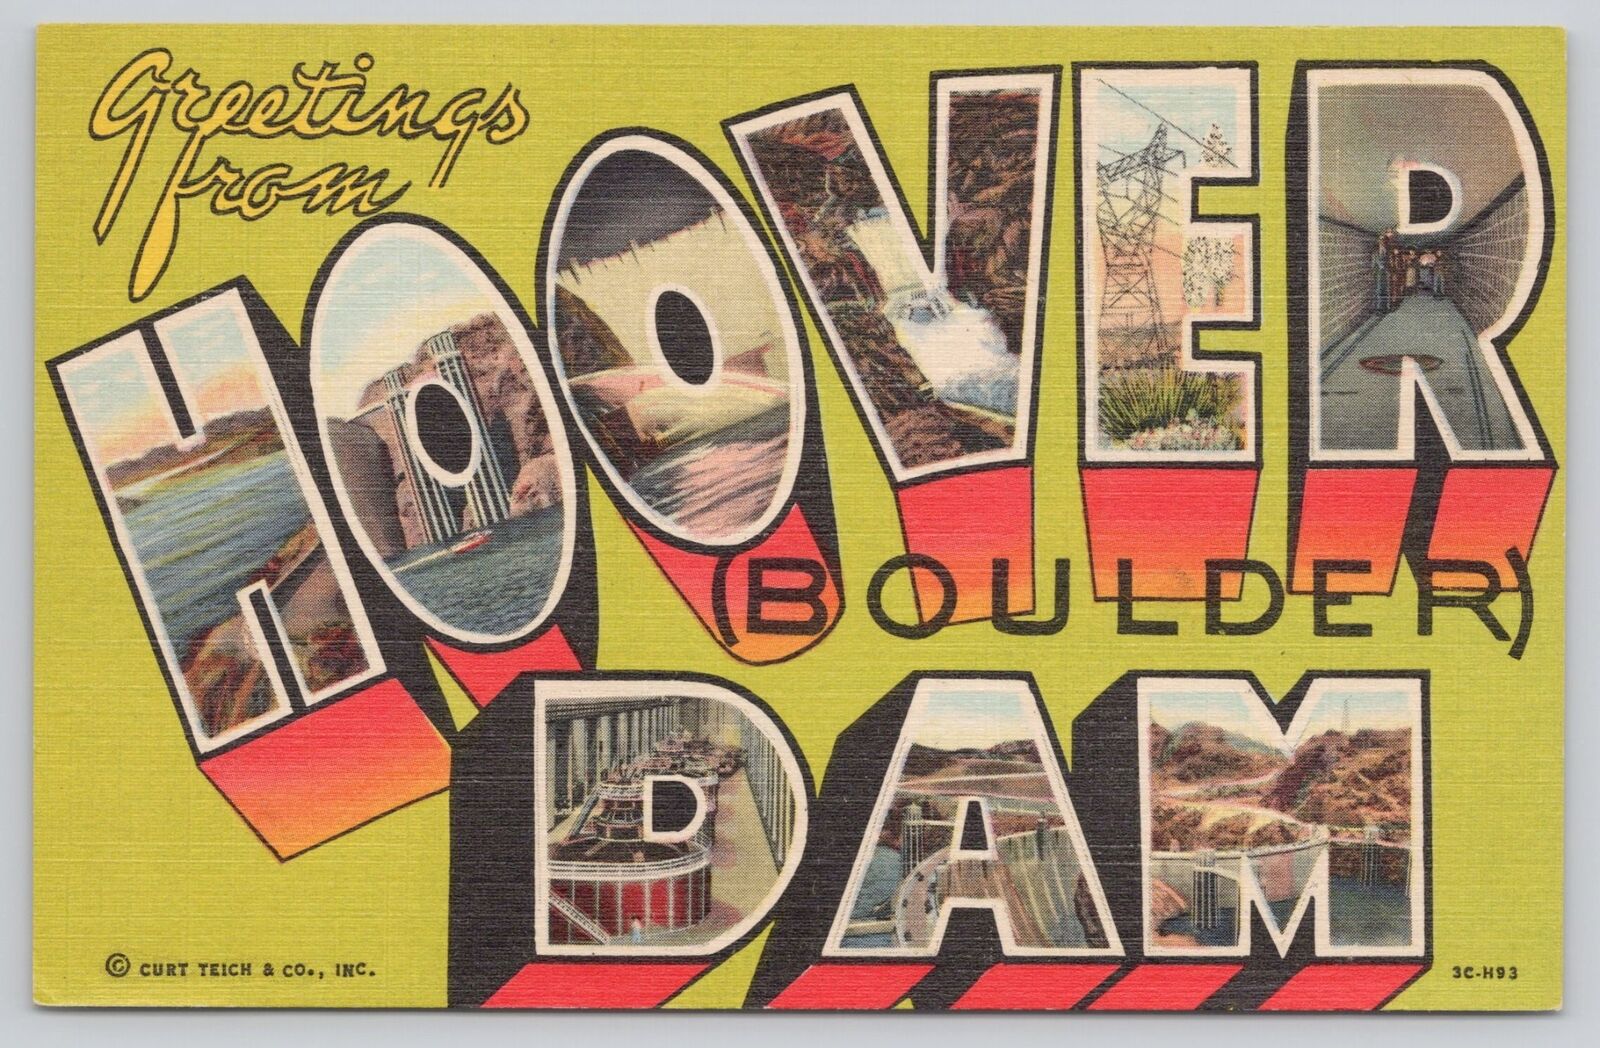 Postcard Greetings From Hoover Boulder Dam Large Letter Curt Teich